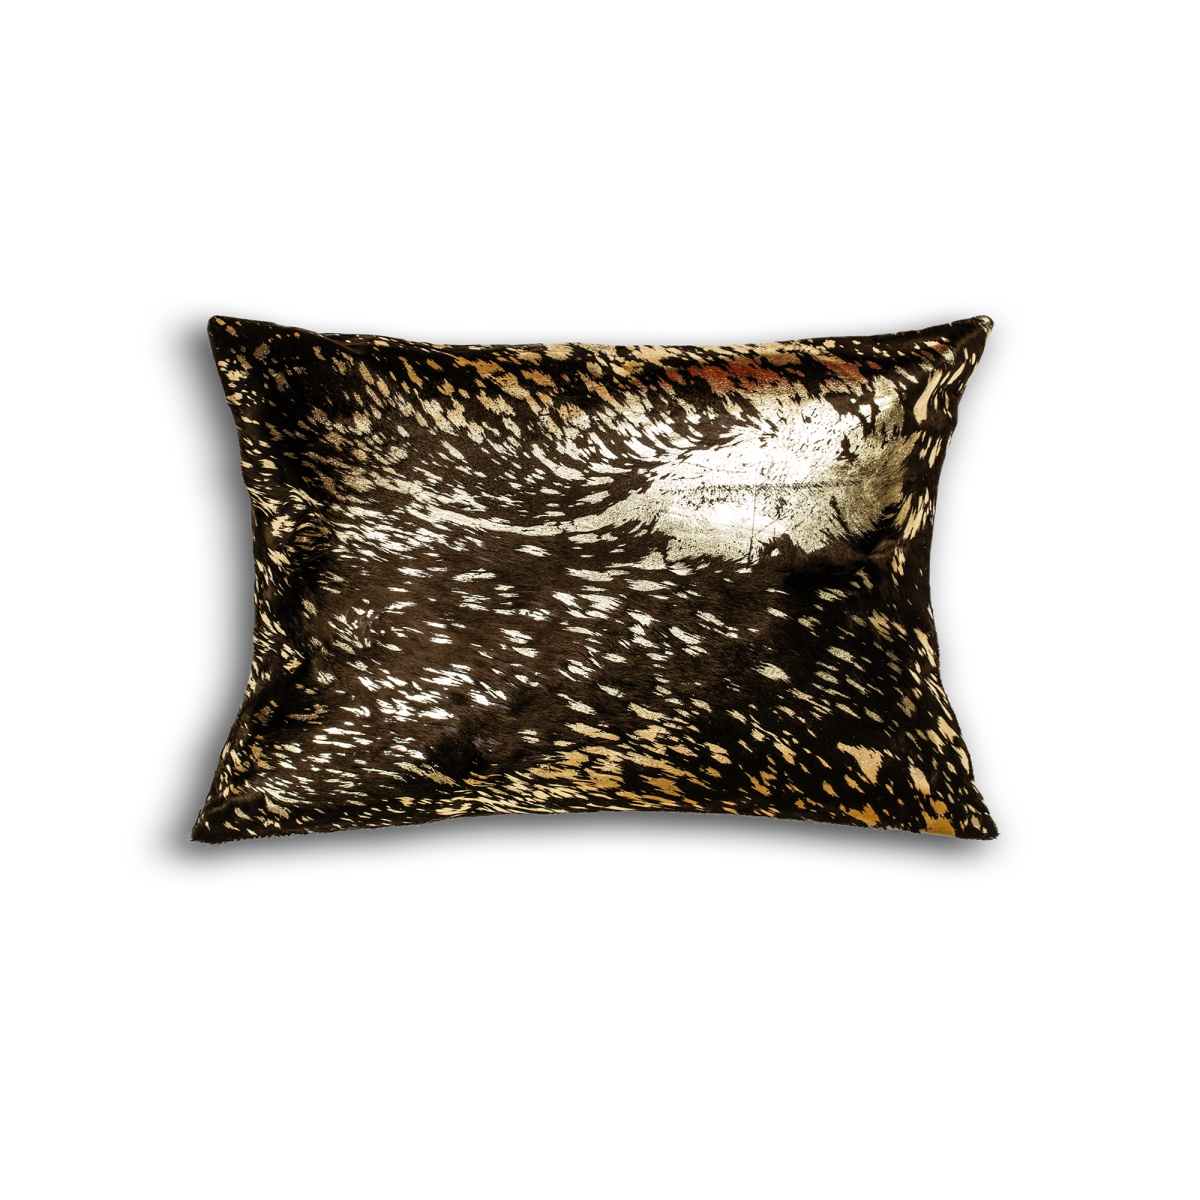 676685025654 12 X 20 In. Torino Scotland Cowhide Pillow - Chocolate & Gold